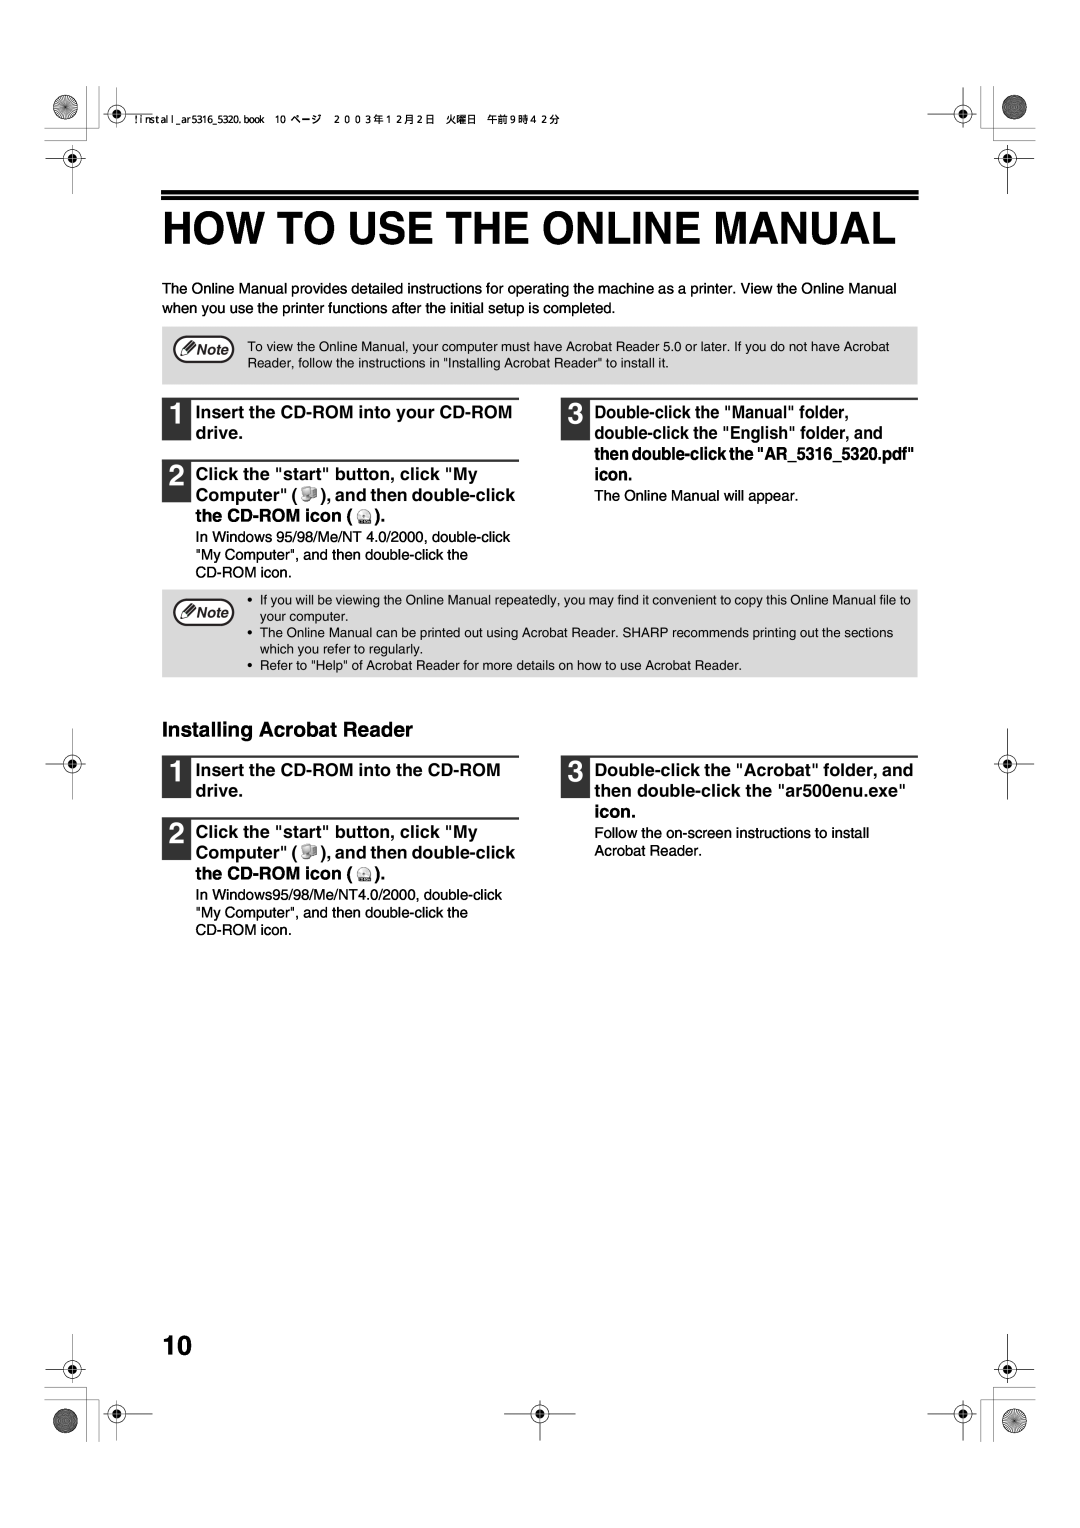 Sharp AR-5320 X, AR-5316 X setup guide How To Use The Online Manual, Installing Acrobat Reader 